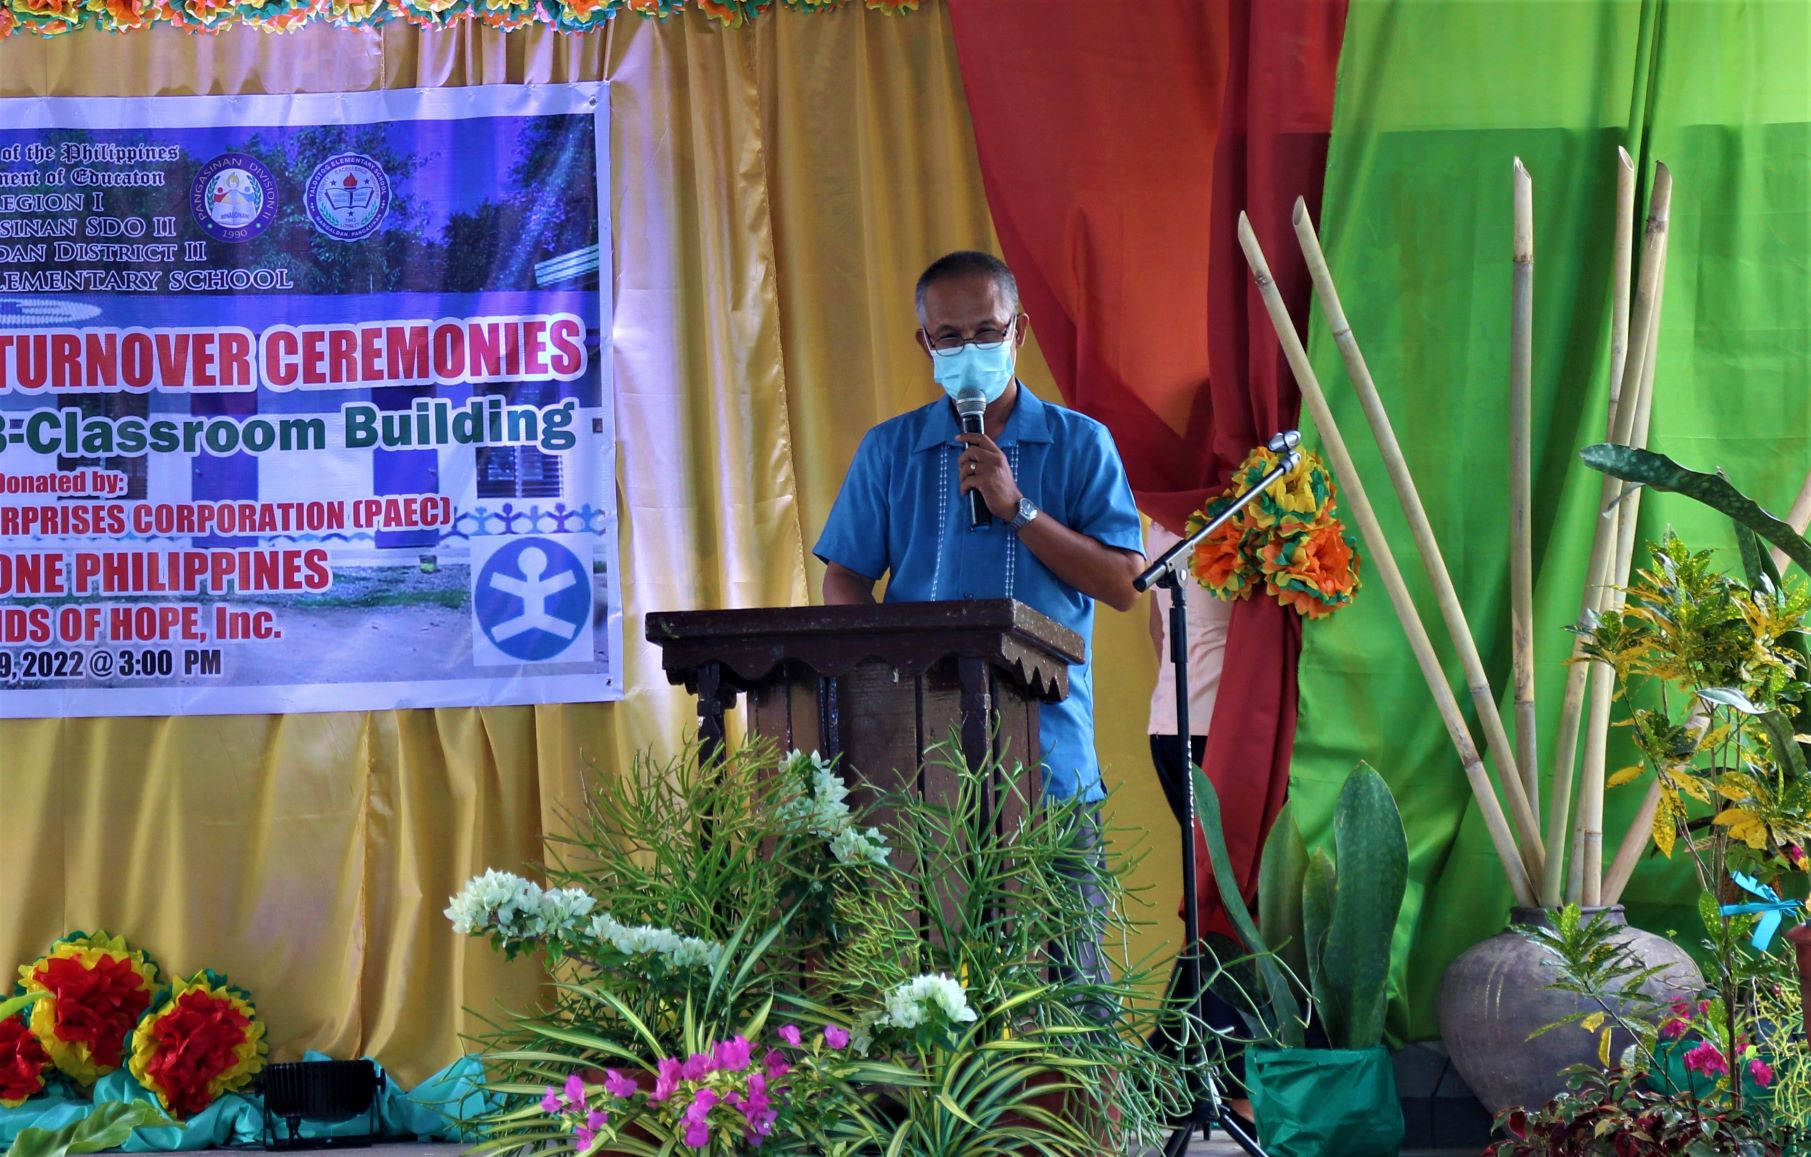 Reynaldo Javier, the President of the TES Teachers’ Club welcomed everyone to the event.